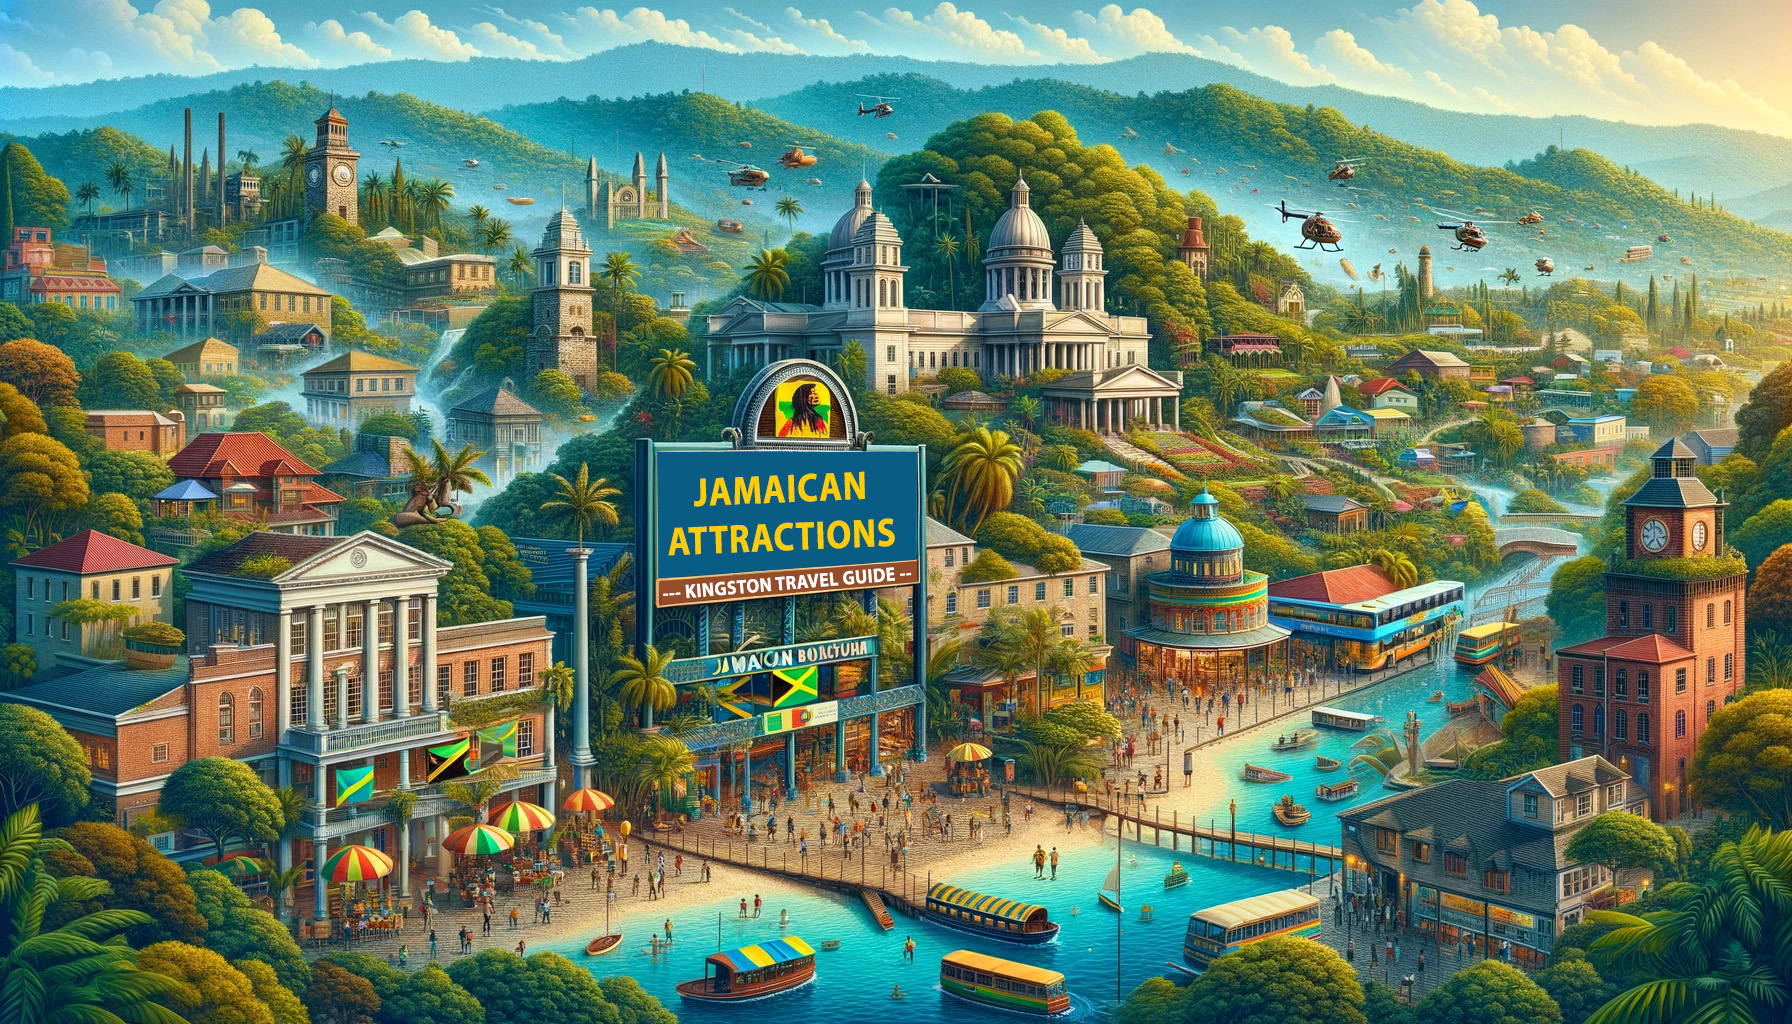 Jamaican Attractions - Kingston Travel Guide